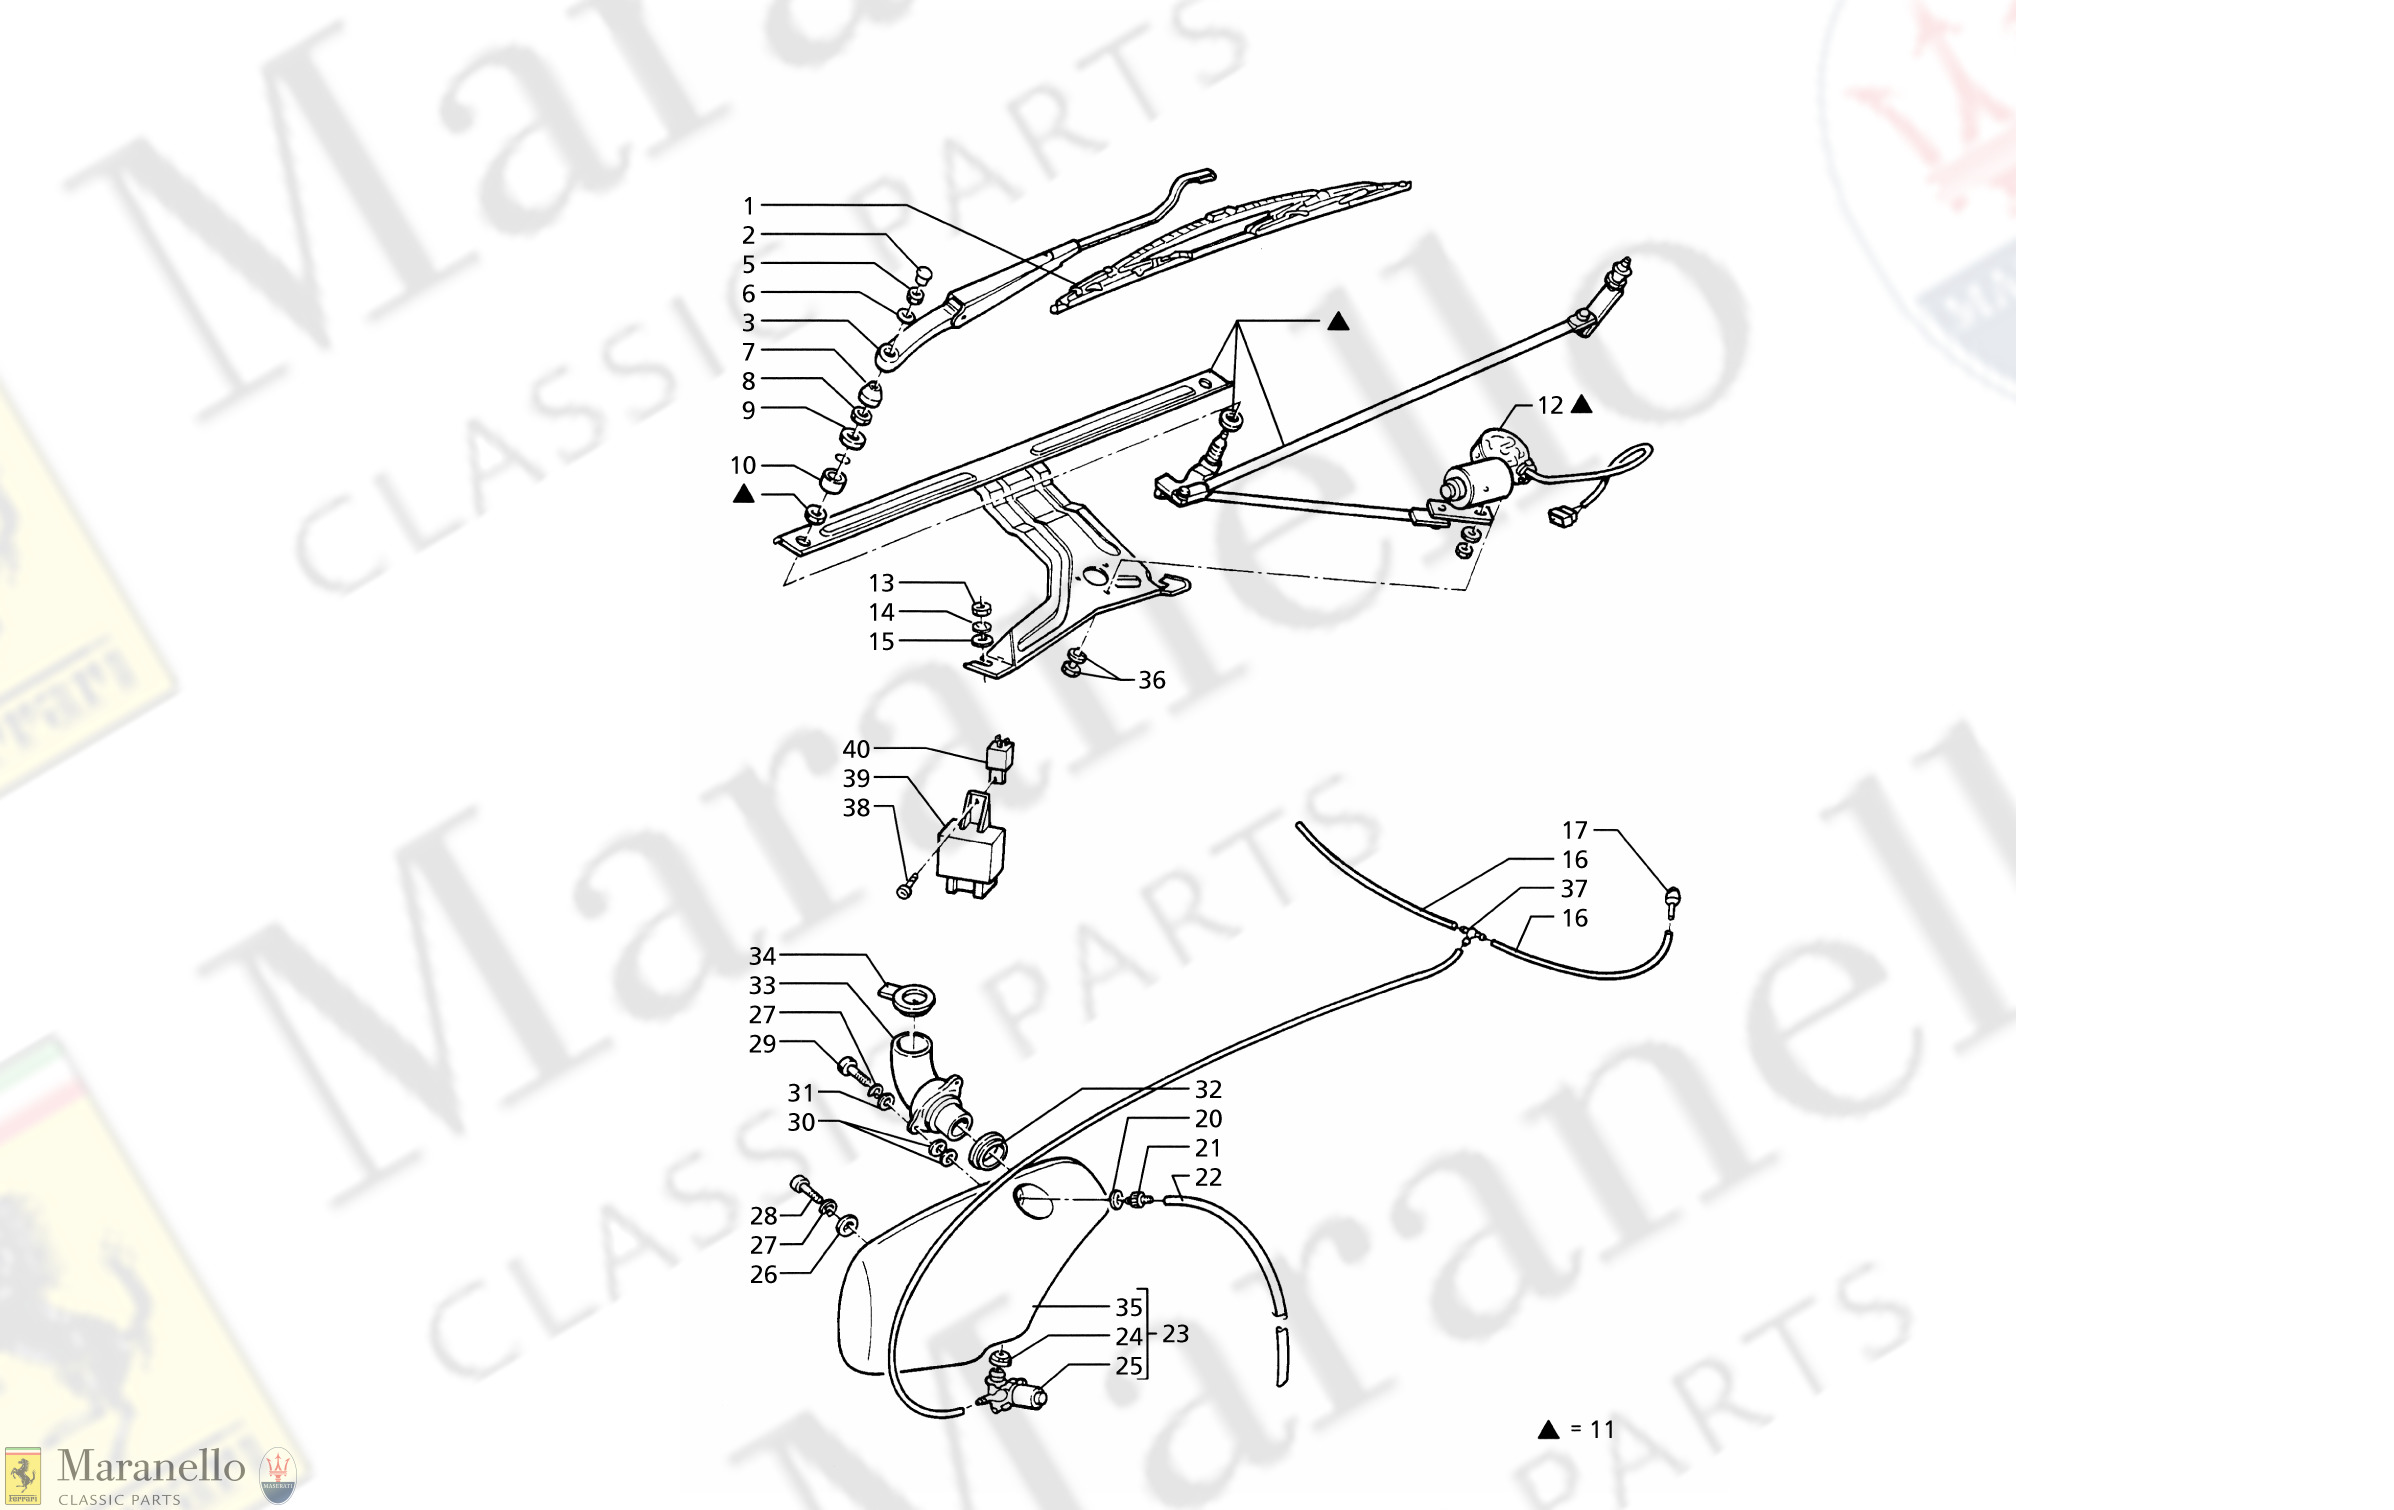 55.1 - WINDSCREEN WIPER AND WASHER (RIGHT H.D.)